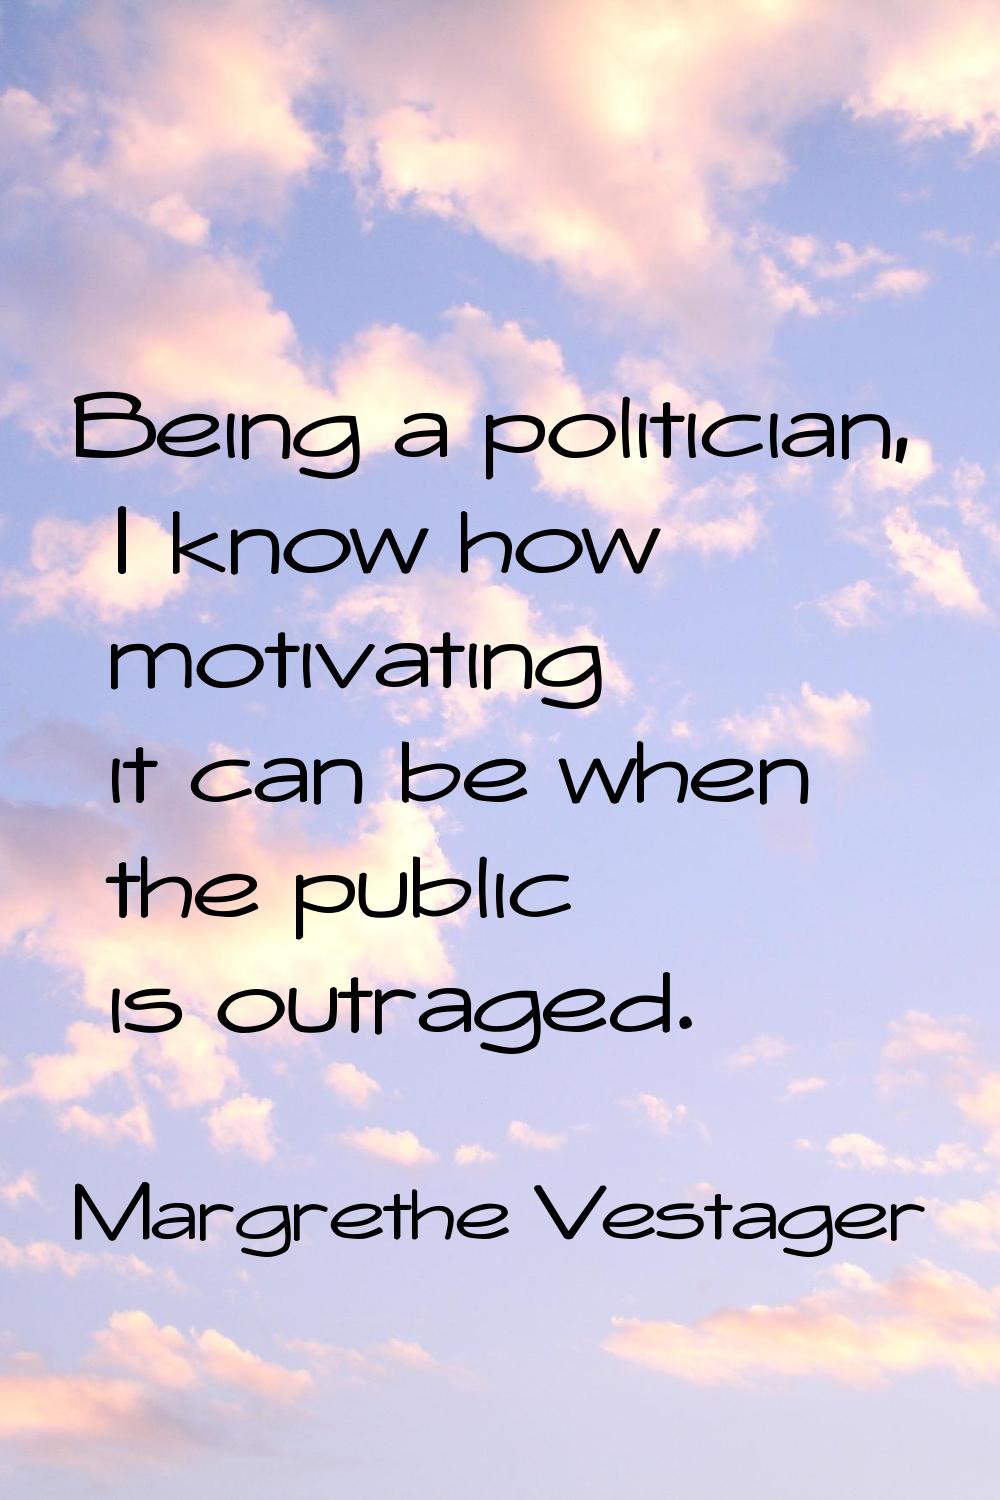 Being a politician, I know how motivating it can be when the public is outraged.